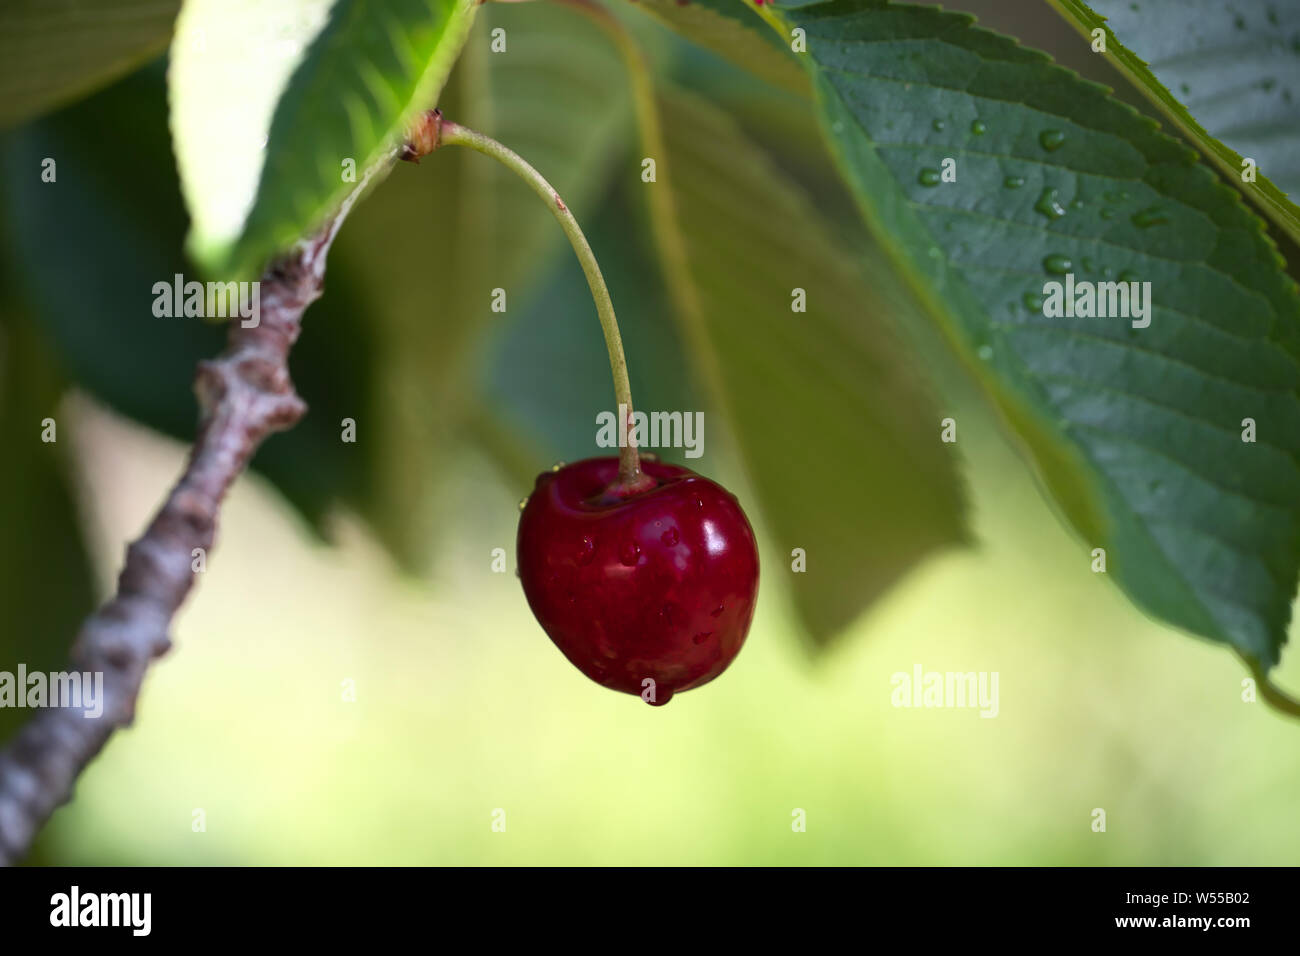 A cherry, one red ripe cherry fruit on a tree branch Stock Photo